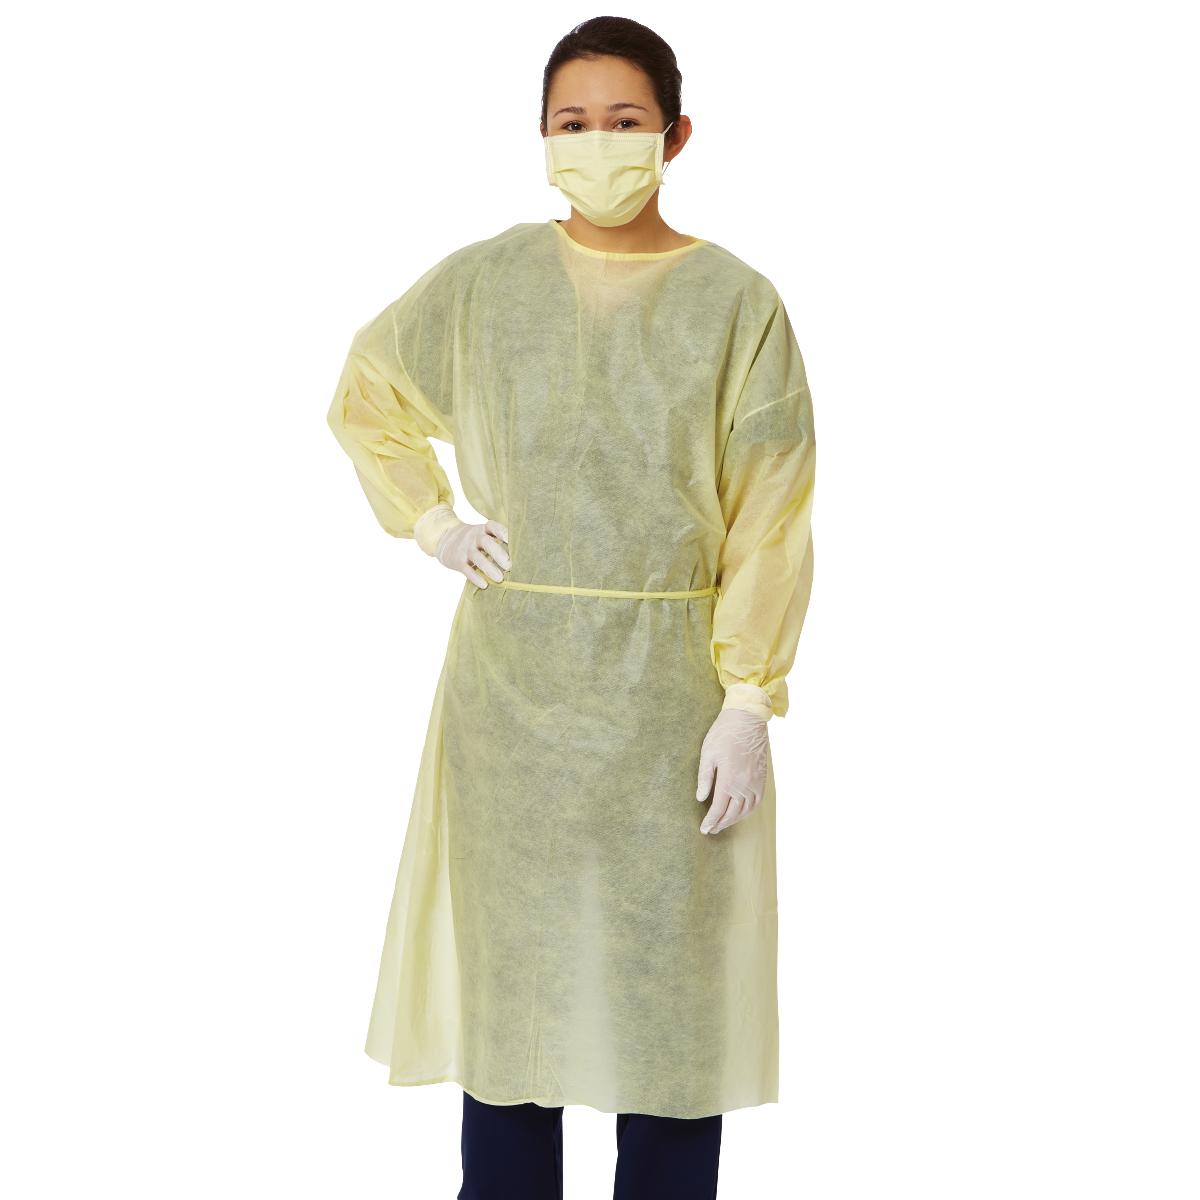 AAMI Level 1 Isolation Gown, Elastic Wrist, XL